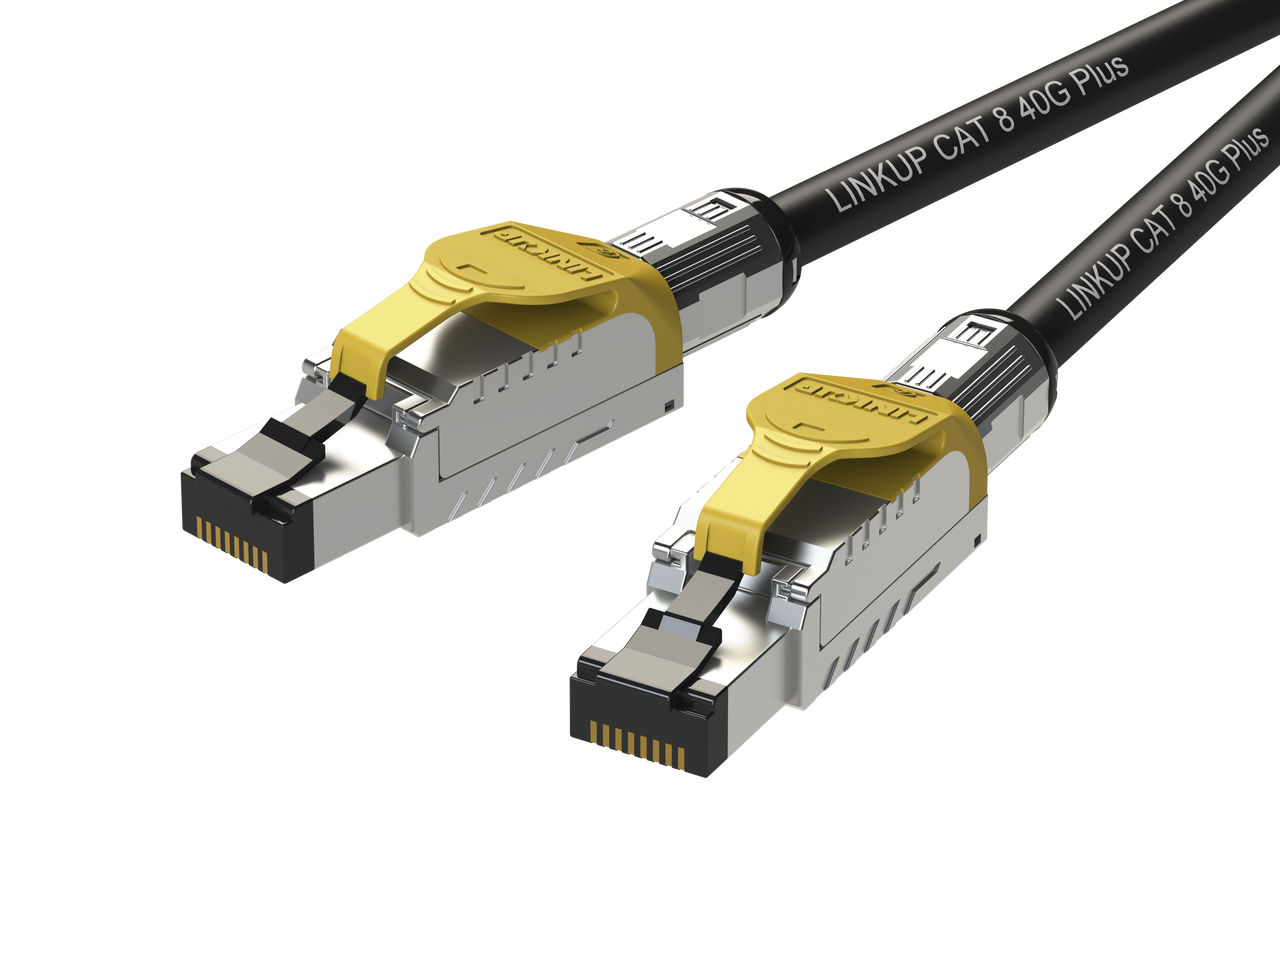 LINKUP] Cat8 Ethernet Patch Cable S/FTP 4 Pair 22AWG Screened Solid Cable, 2000Mhz (2Ghz) up to 40Gbps